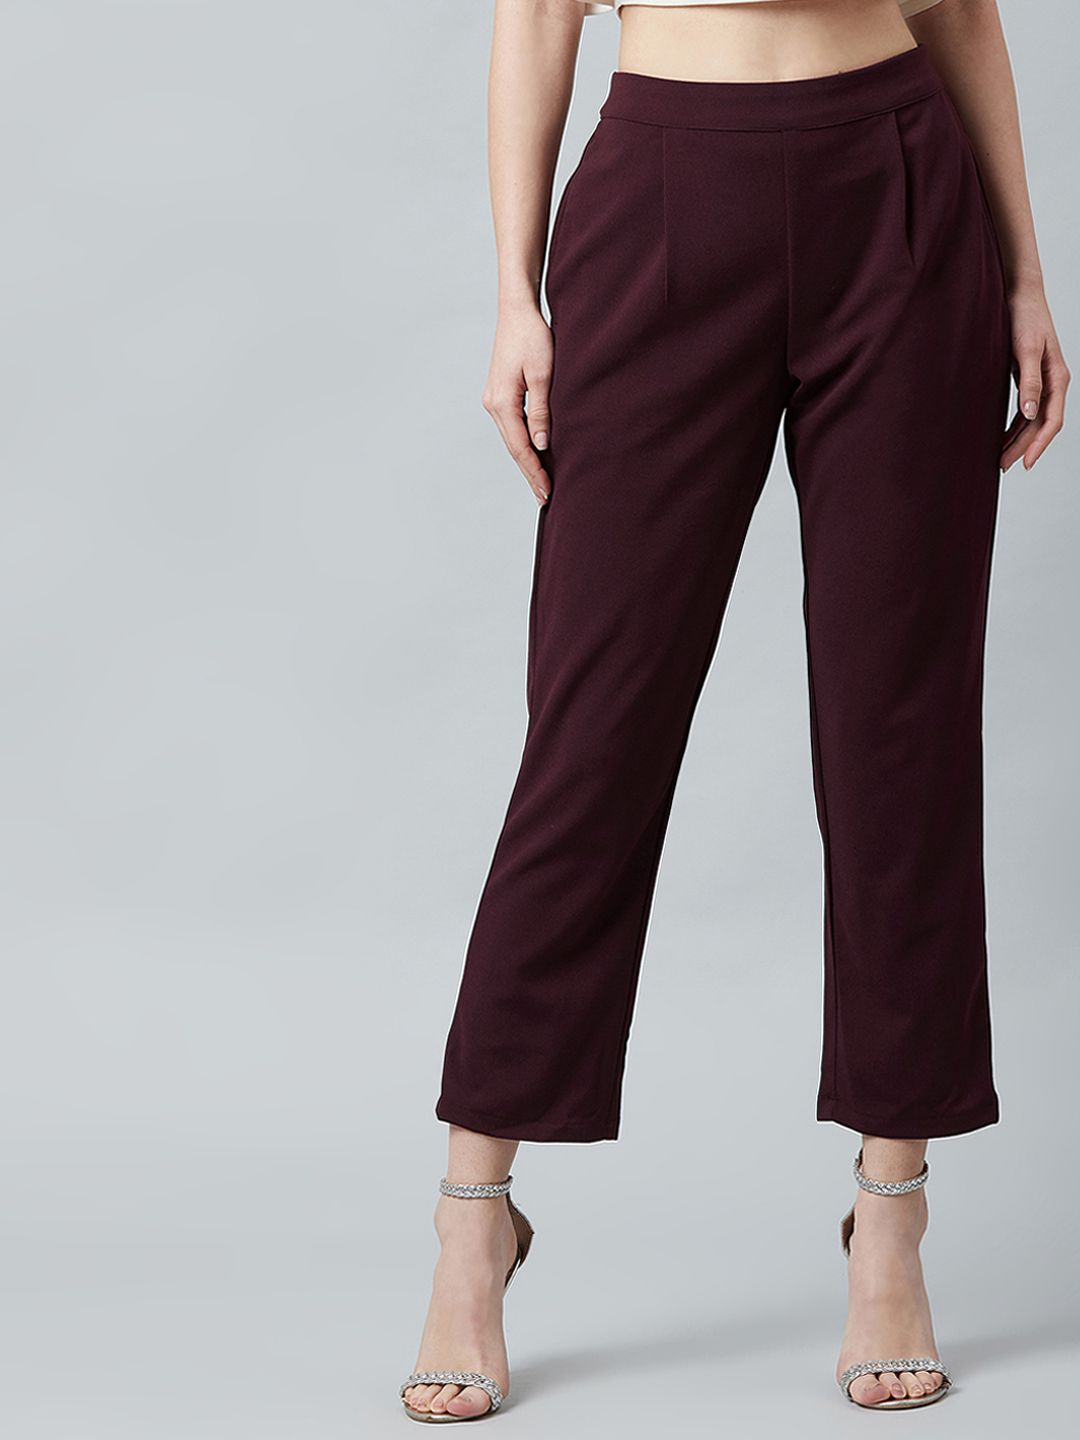 Athena Women Burgundy Regular Fit Solid Formal Trousers Price in India